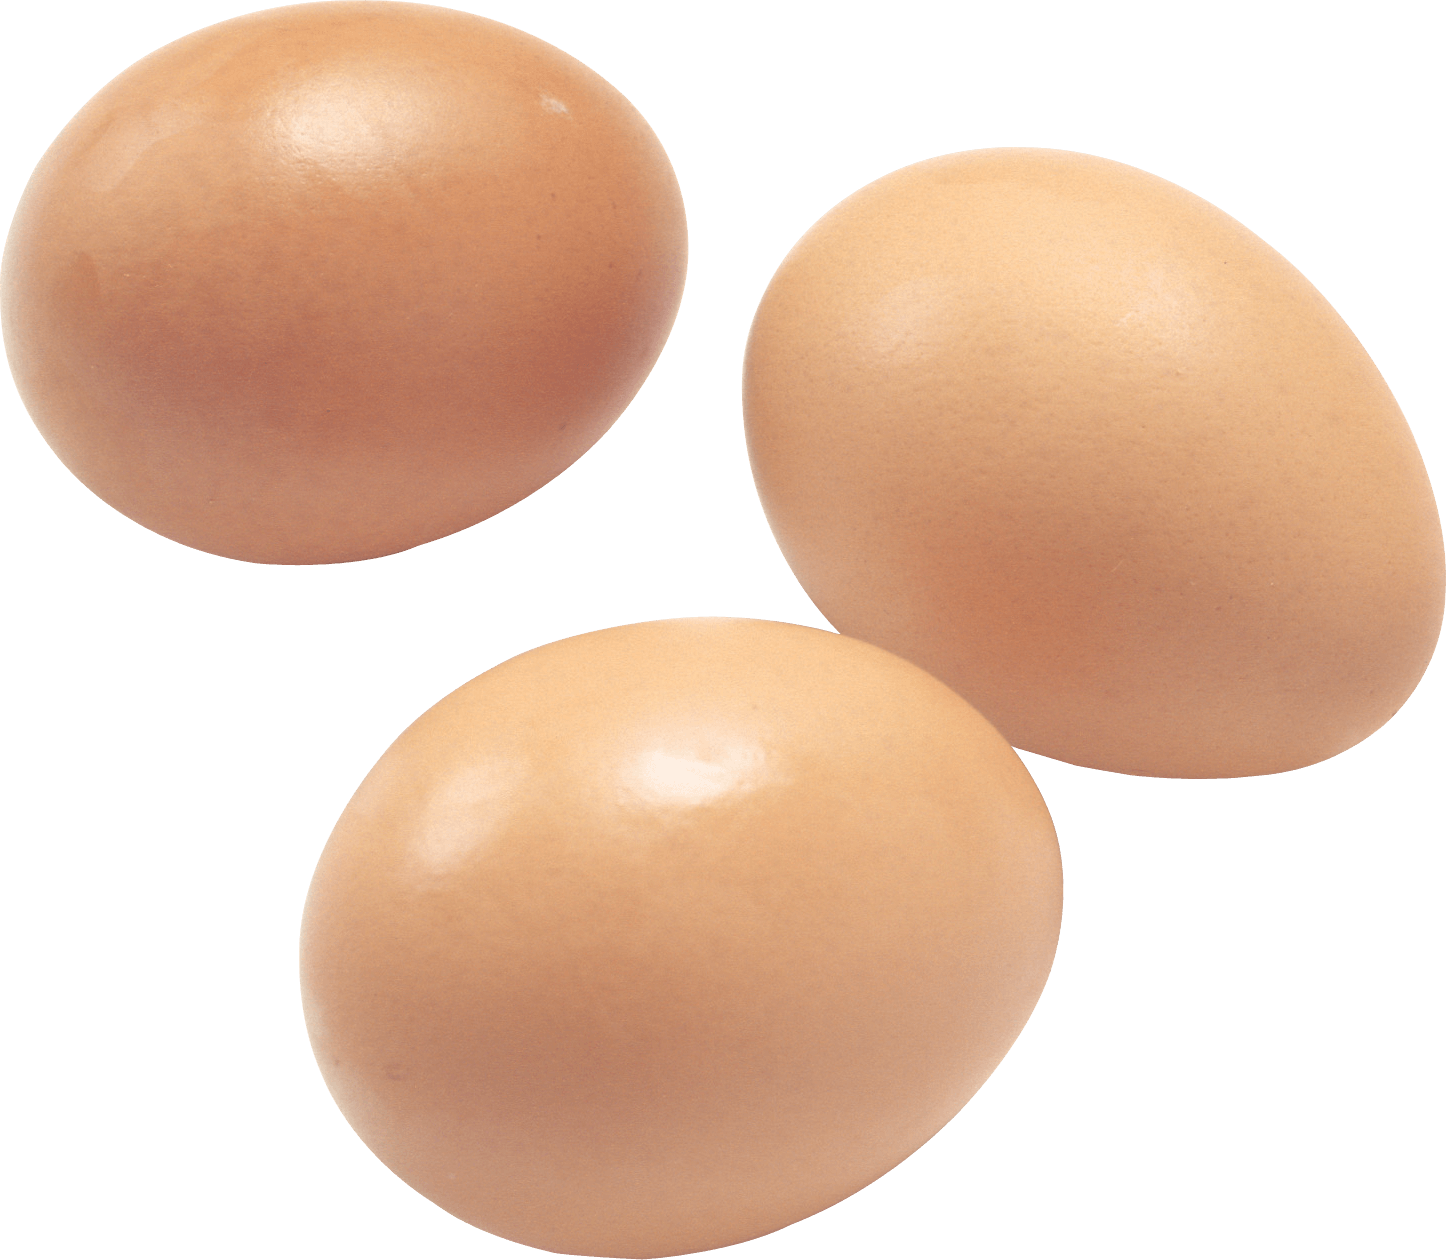 Egg PNG Image  Food png, Eggs, Png images